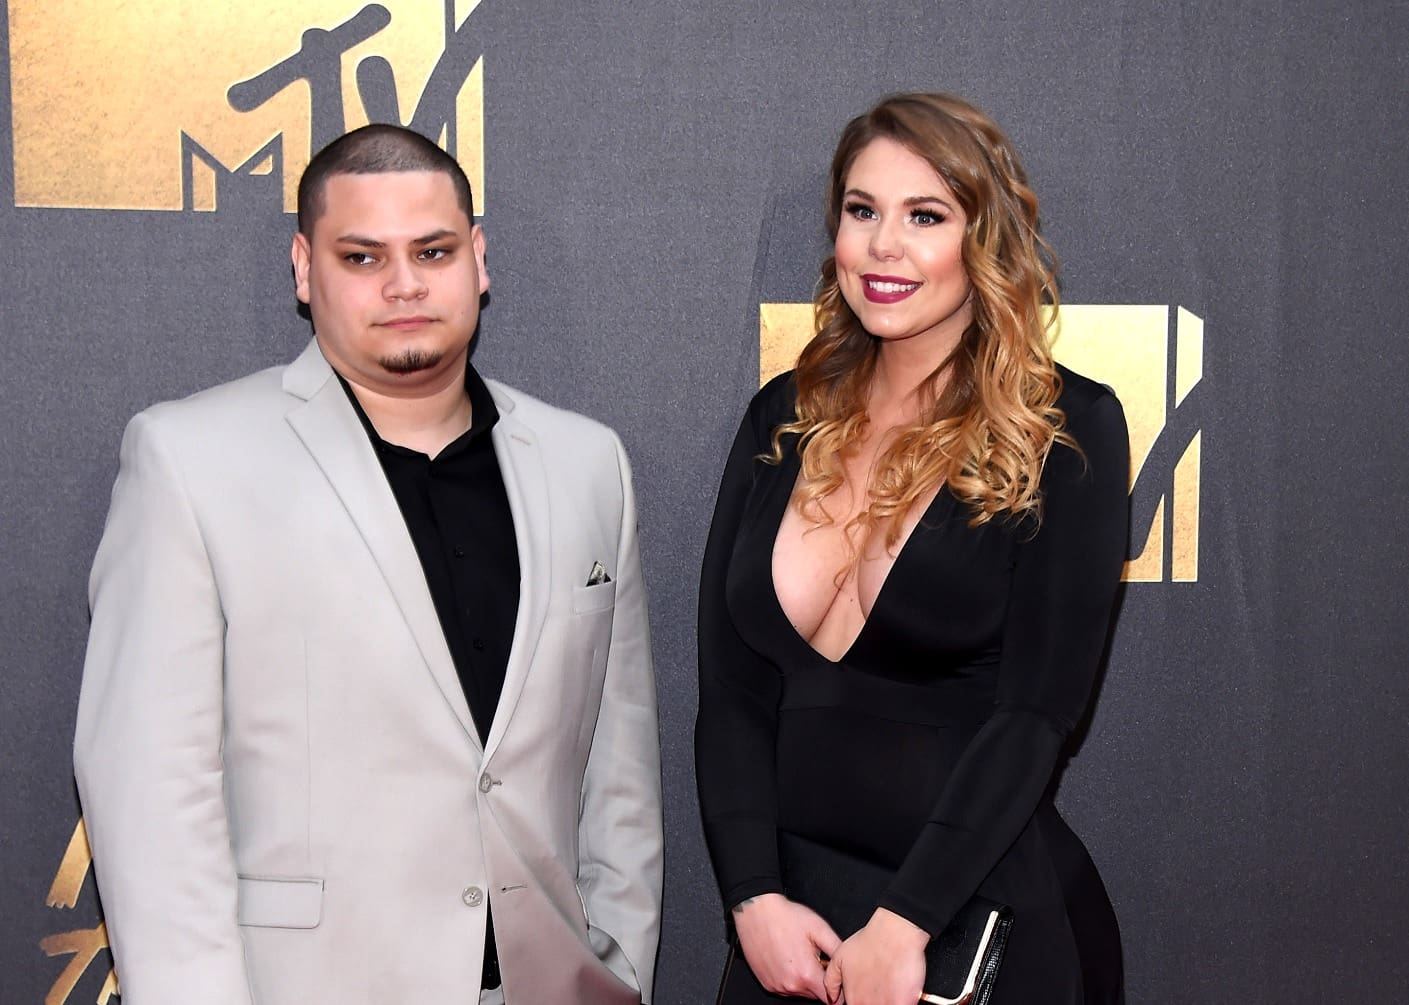 kailyn-lowry-fears-her-ex-jo-rivera-will-send-her-to-prison-heres-why